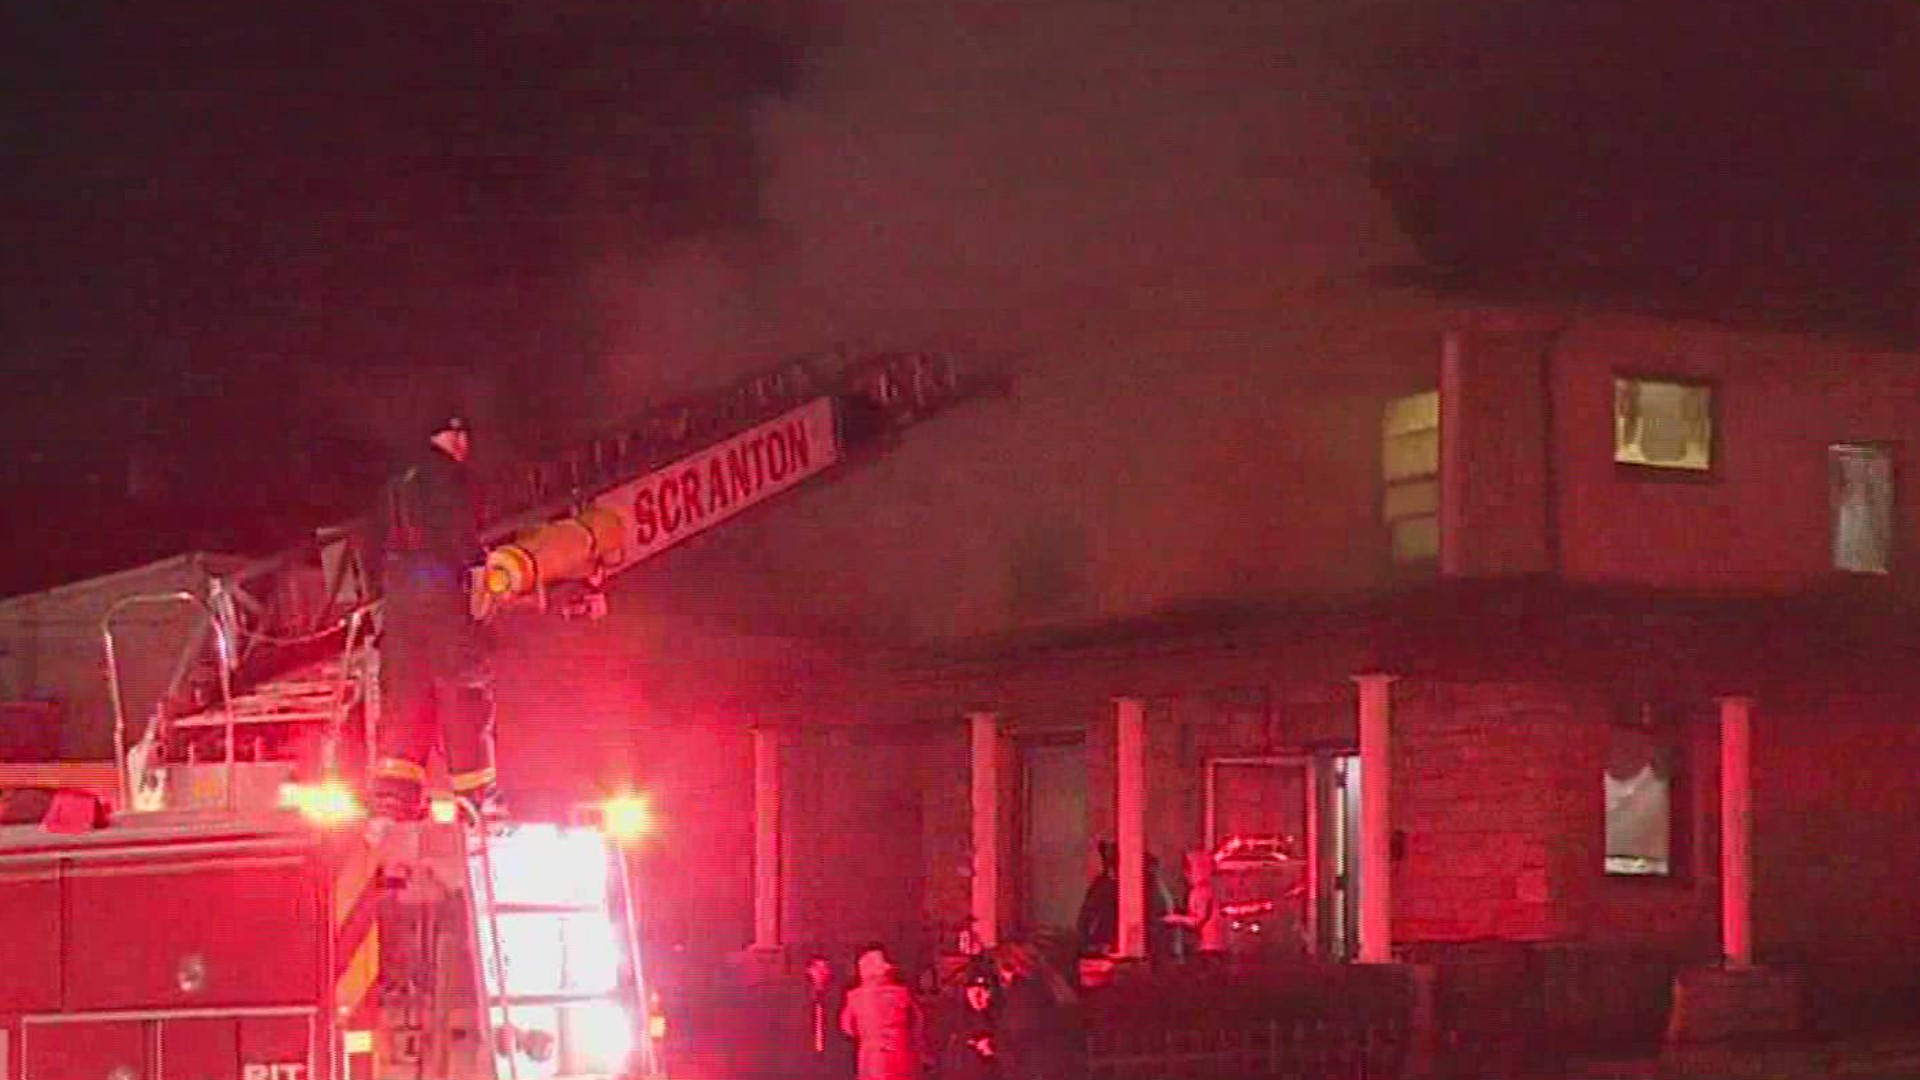 Christmas Day began with crews battling a fire in Scranton.